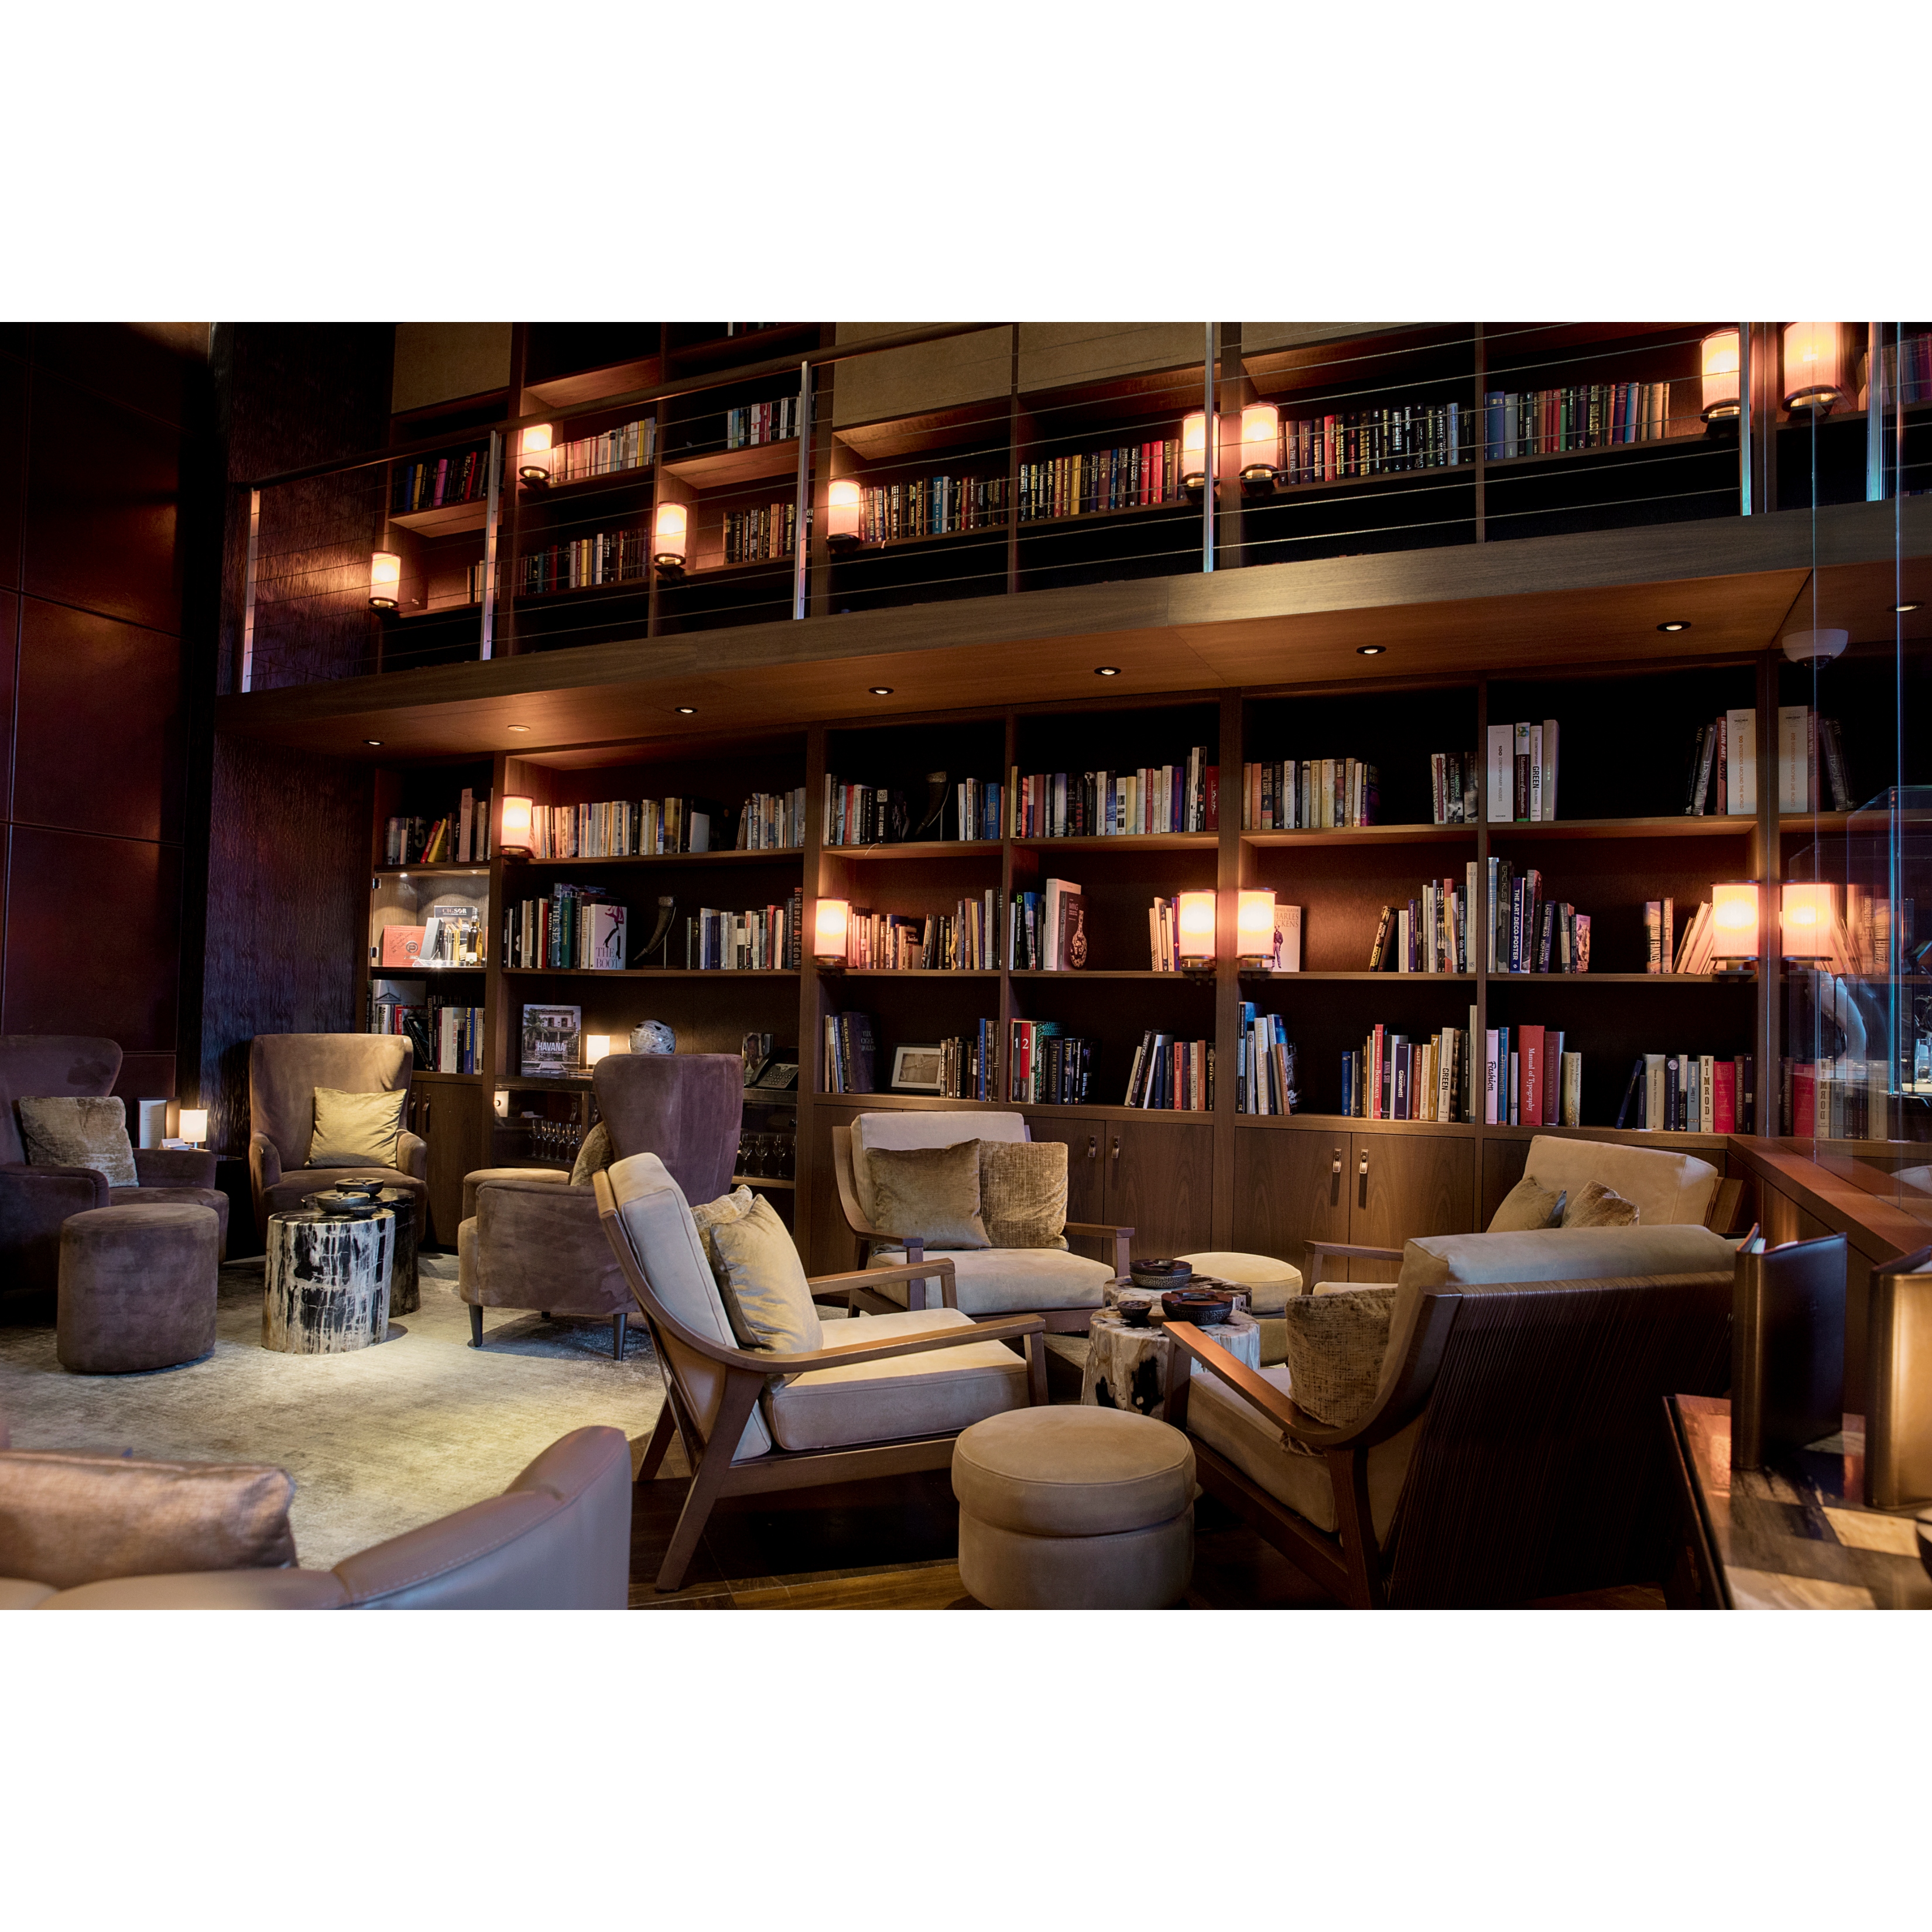 Detail of the cigar library at The Chedi Andermatt. With tall bookshelves in the background and lamps attached to them creating a cozy atmosphere.